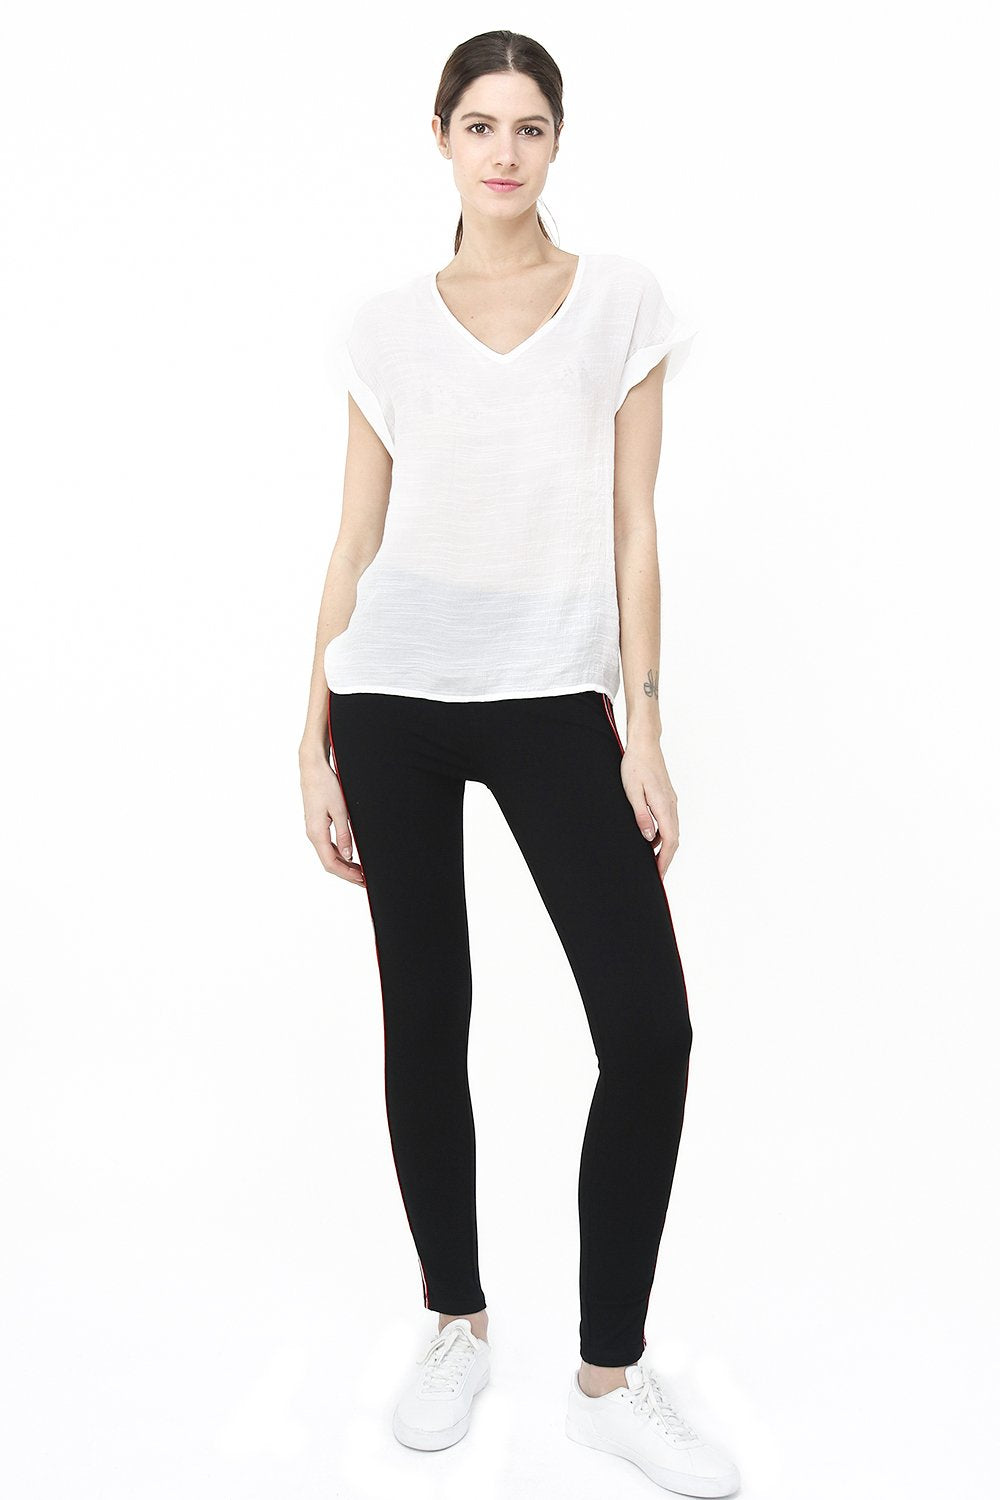 SLIM FIT PANT WITH BI-COLORS SIDE STRIPS